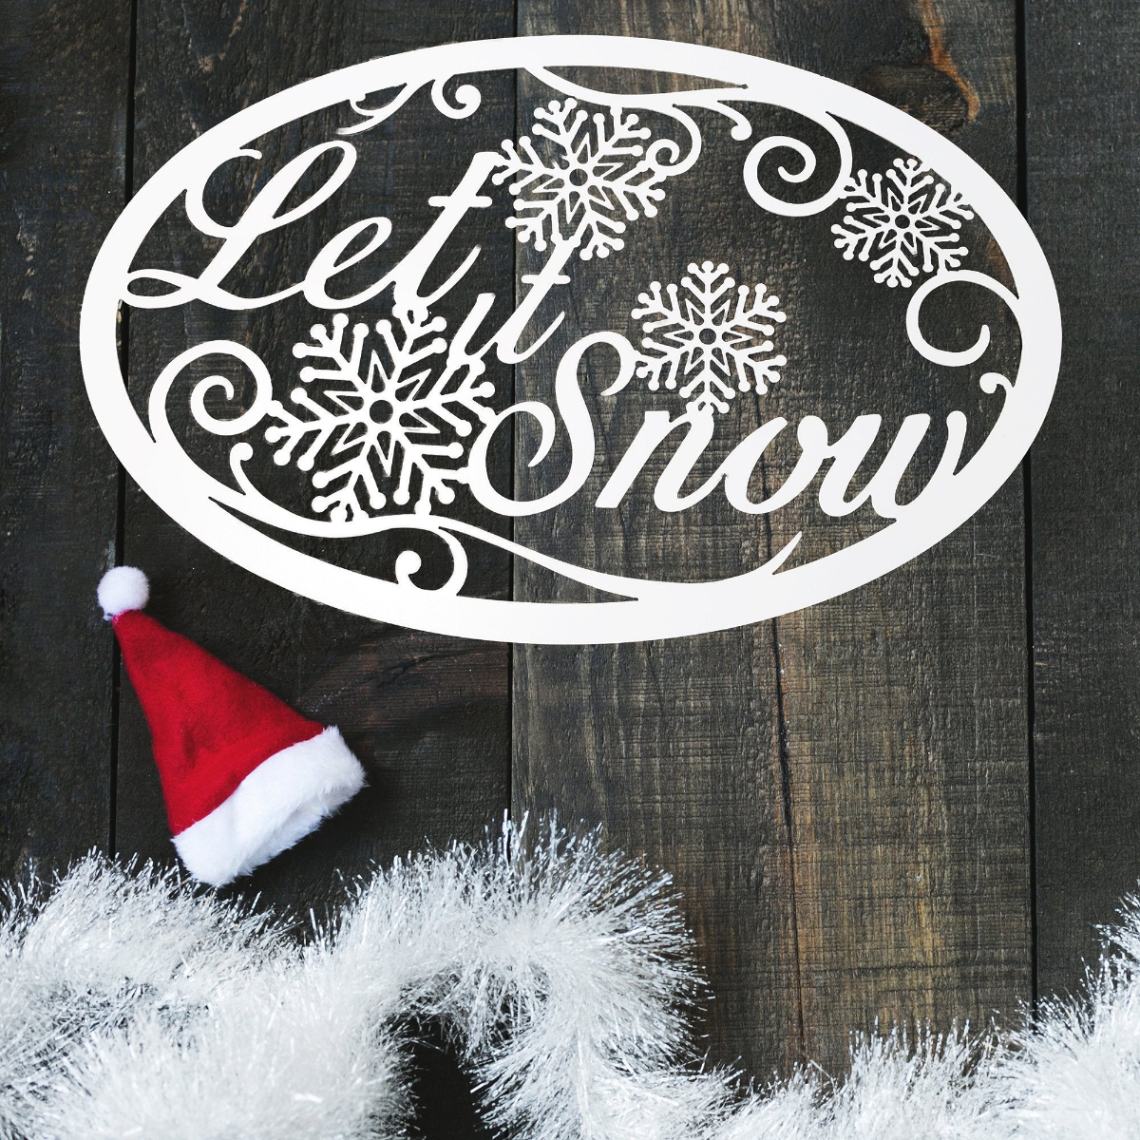 Let It Snow Winter Season Metal Sign - Holiday Wall Decor - Christmas Decoration - White Winter Wall Hanging